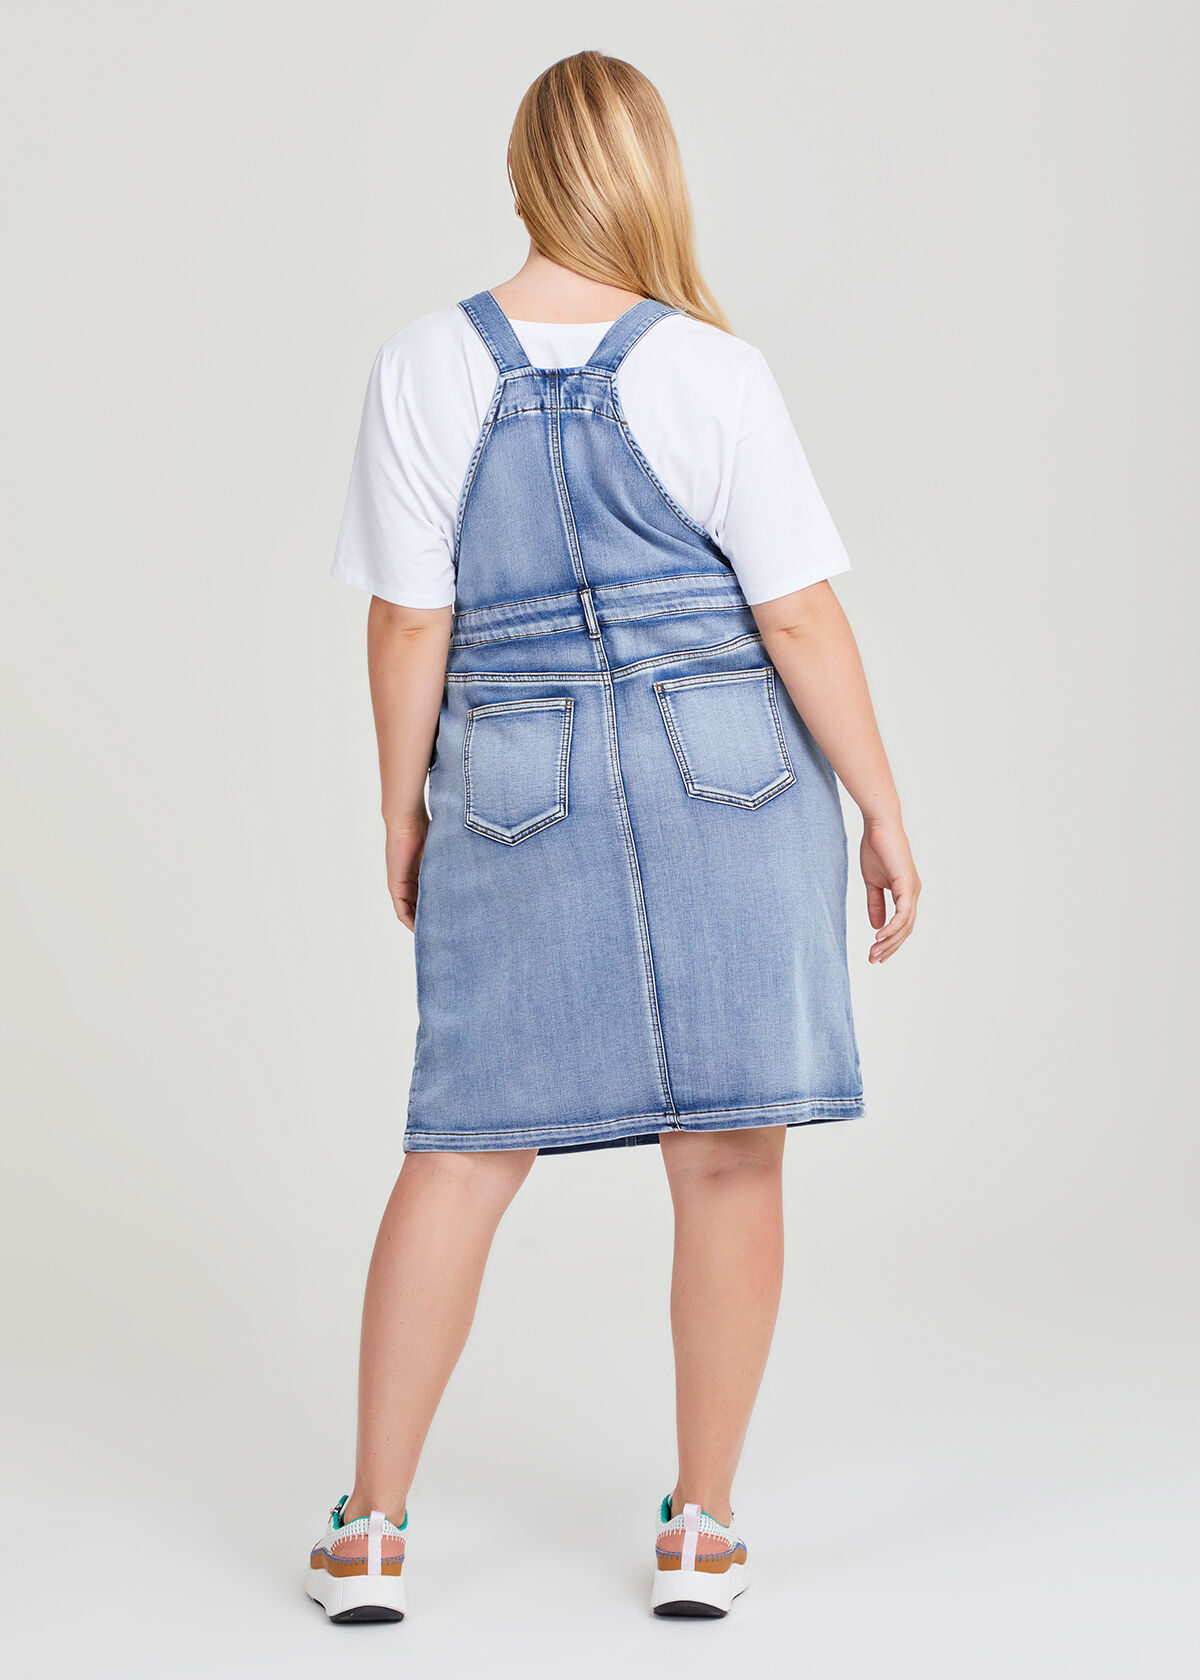 Buy FCK-3 Women's Pedal Fit Stretchable Denim Dungaree at Amazon.in